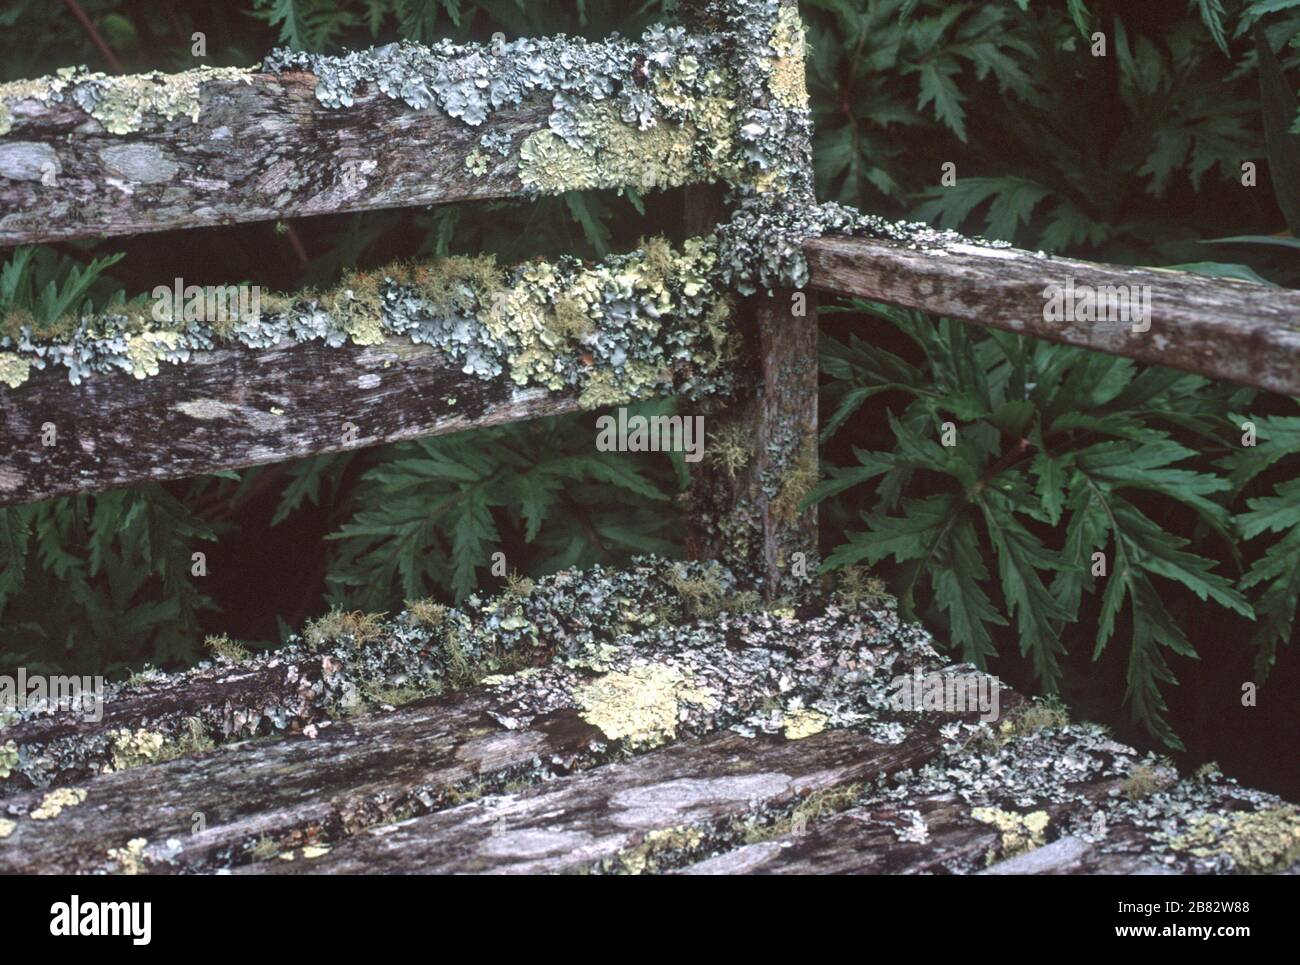 Moss and lichen grow on an old wooden bench seat in Tresco Gardens in the Isles of Scilly, Cornwall, England. Stock Photo